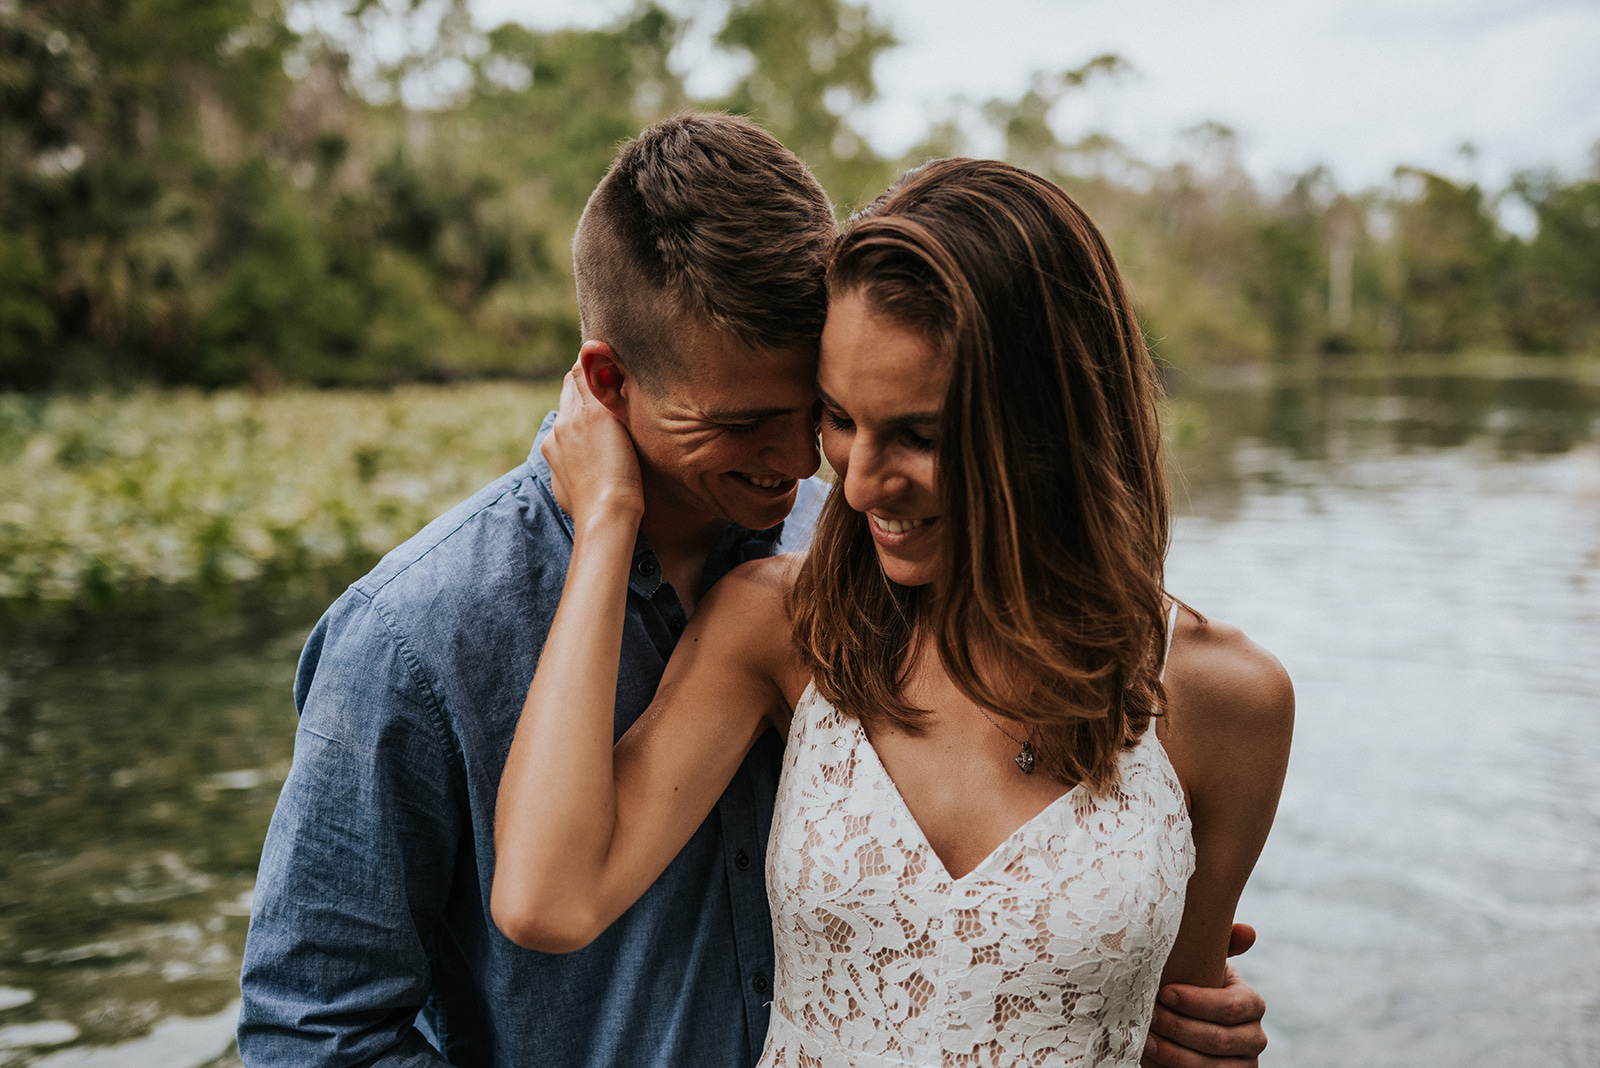 Orlando Engagement session at Wekiva Springs State Park, oak and iron photography